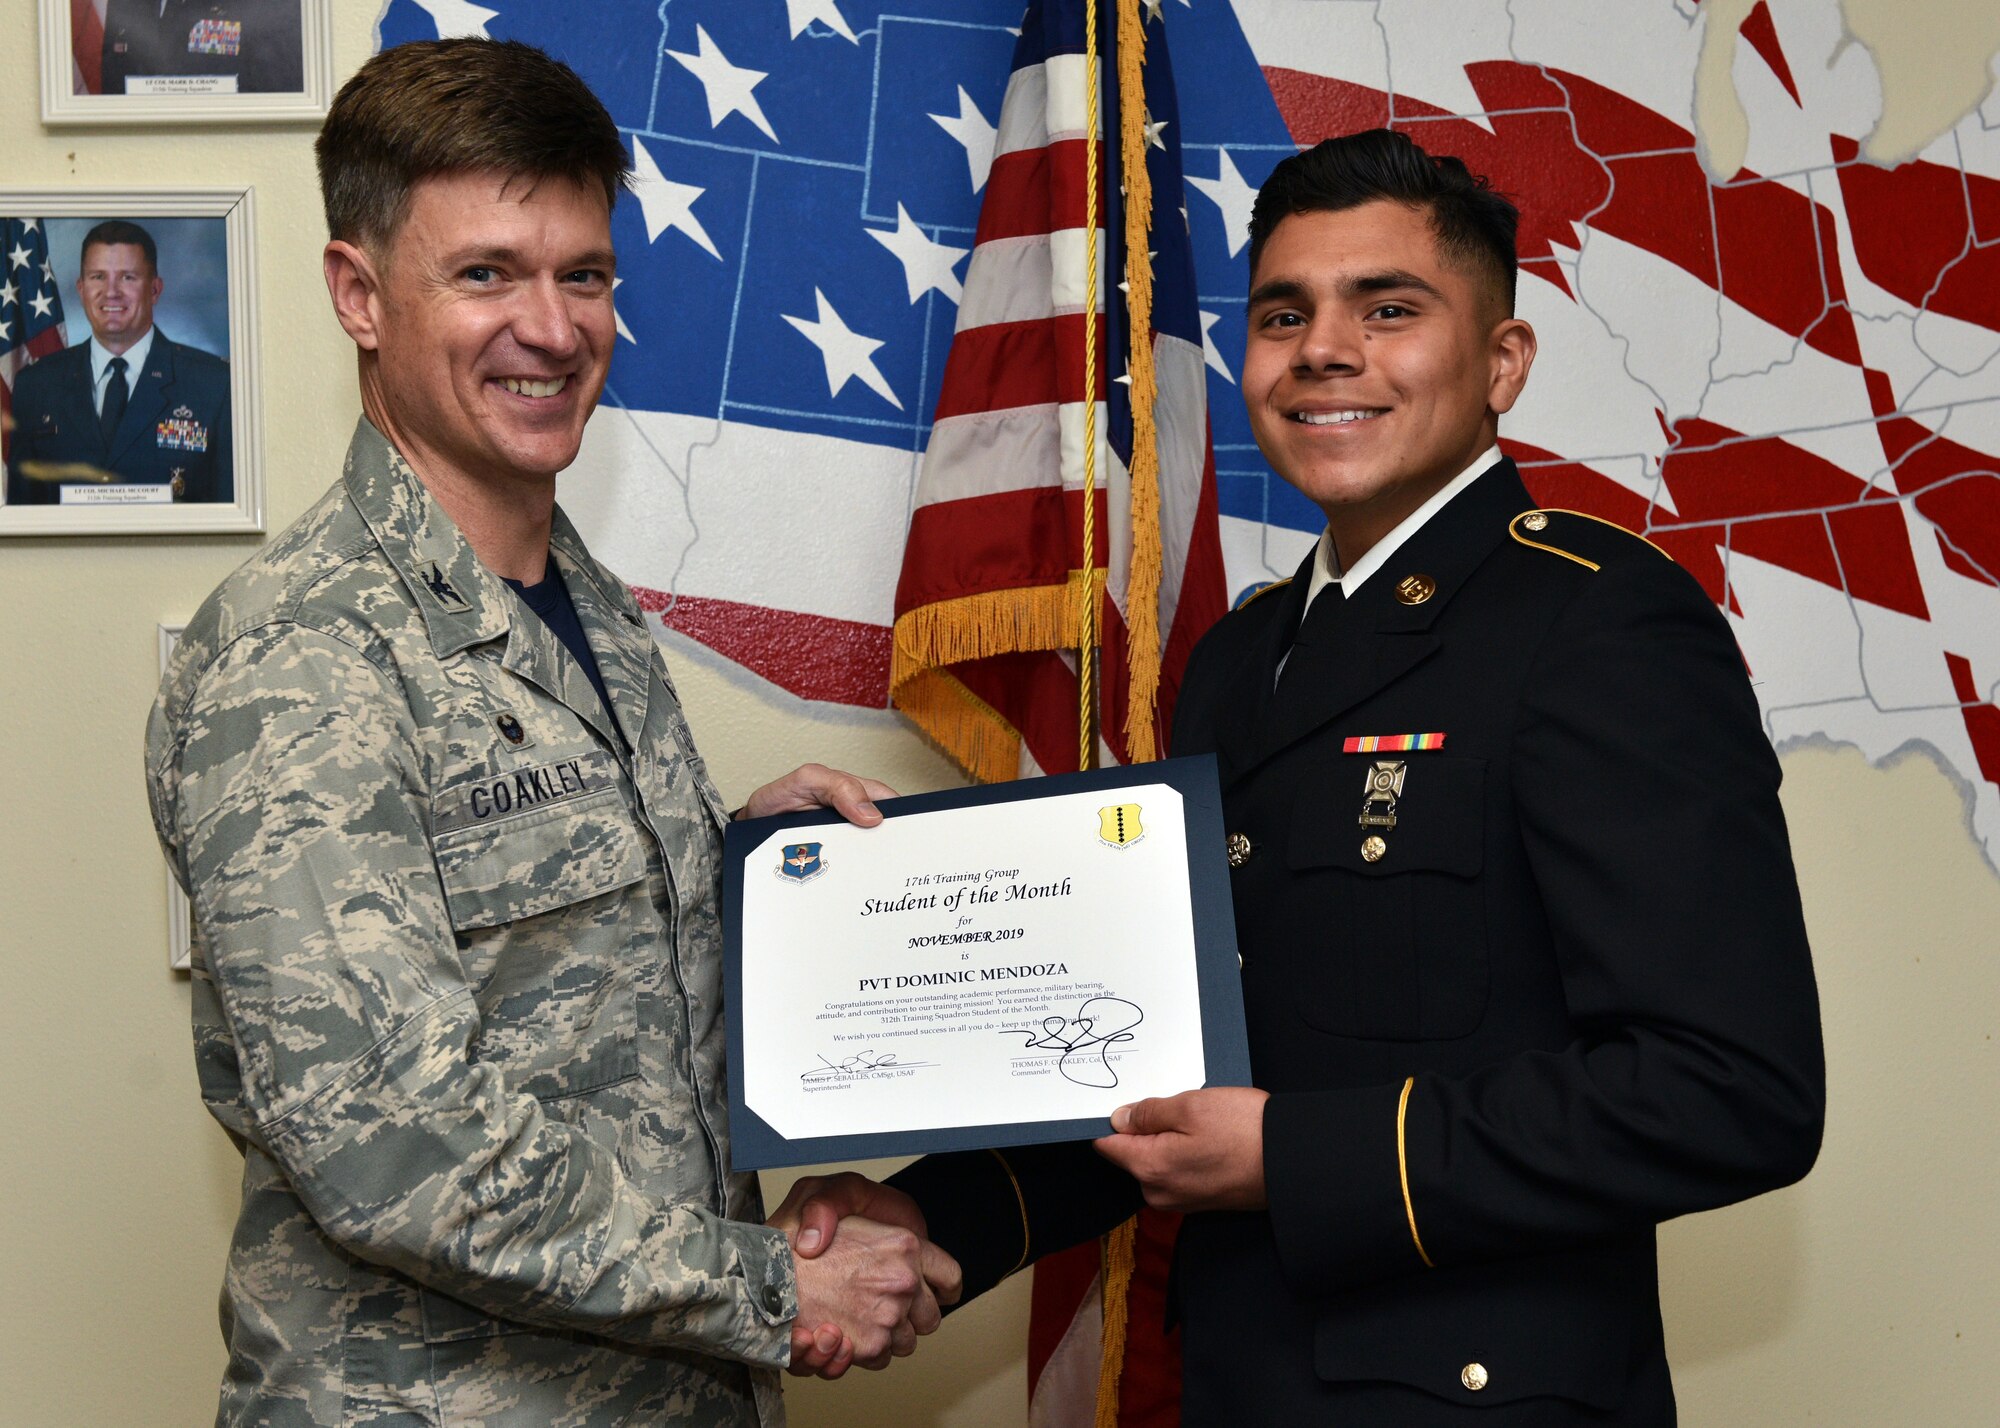 U.S. Air Force Col. Thomas Coakley, 17th Training Group commander, presents the 312th Training Squadron Student of the Month award to Pvt. Dominic Mendoza, 312th TRS student, at Brandenburg Hall on Goodfellow Air Force Base, Texas, Dec. 6, 2019. The 312th TRS’s mission is to provide Department of Defense and international customers with mission-ready fire protection and special instruments graduates and provide mission support for the Air Force Technical Applications Center. (U.S. Air Force photo by Airman 1st Class Robyn Hunsinger)